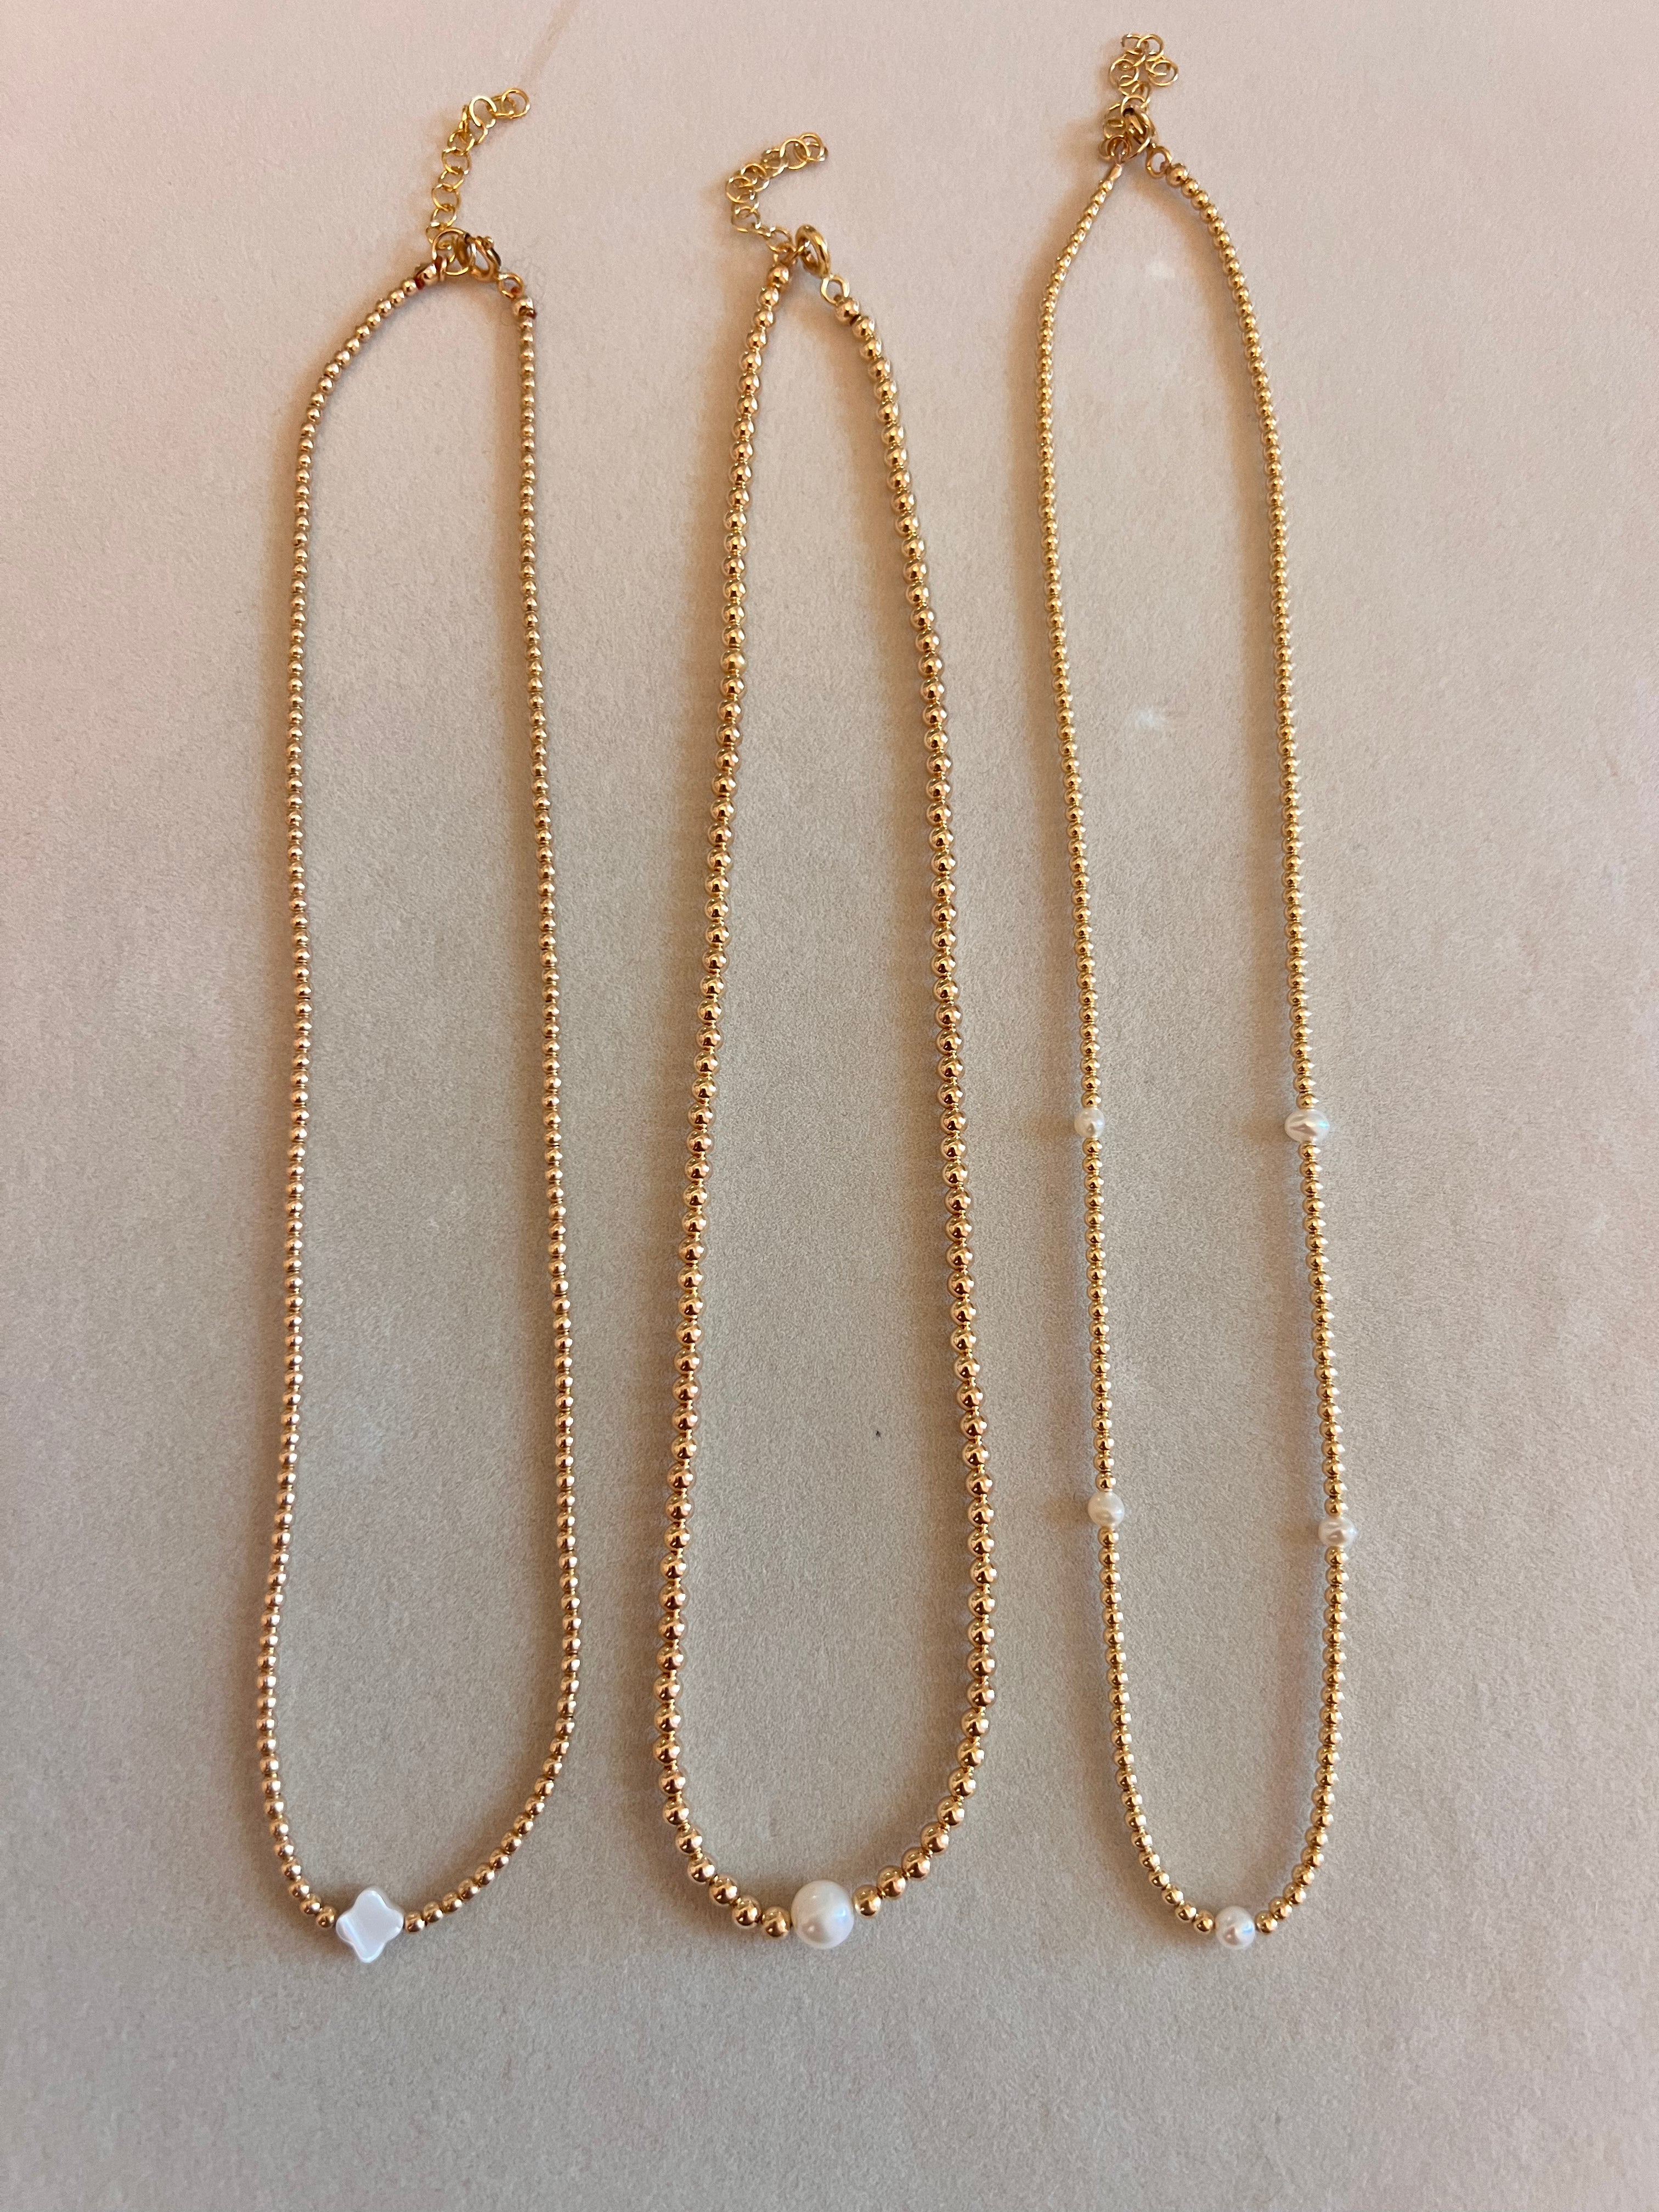 Yellow Gold and Pearl Beaded Necklaces